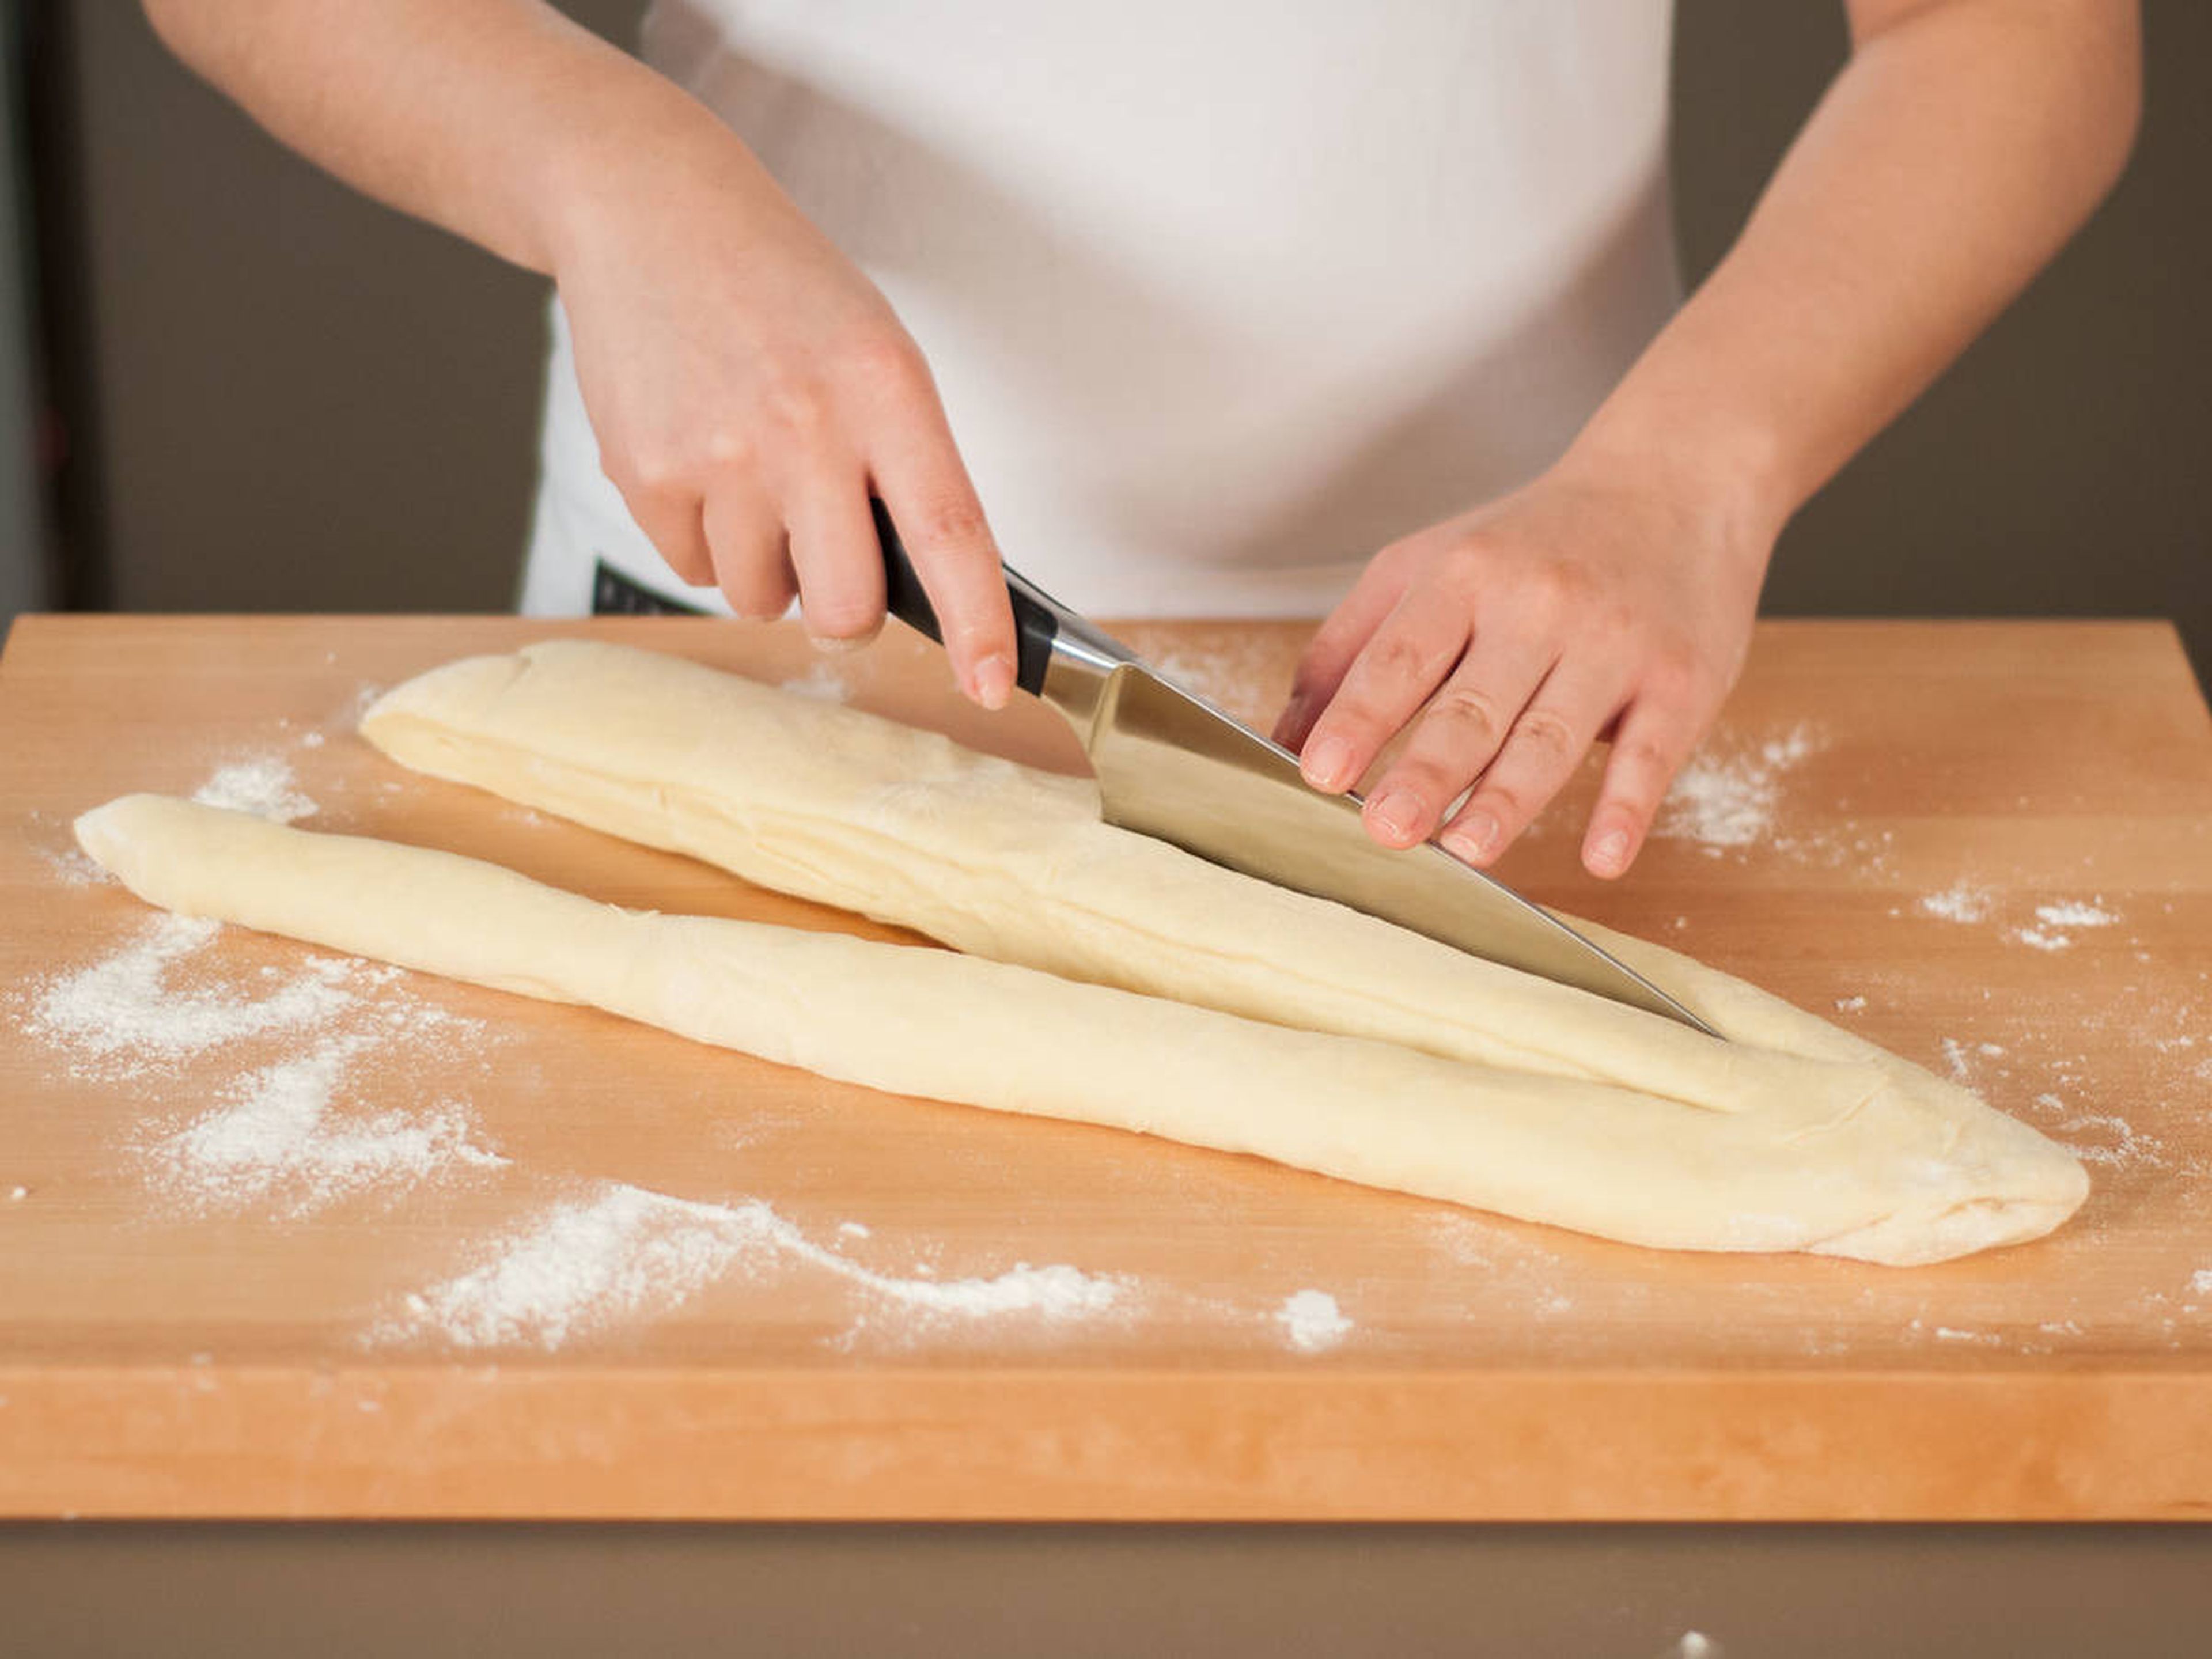 Transfer dough to a lightly floured cutting board. Knead and form a log. Carefully flatten the log with your hands. With a sharp knife, separate the dough into three strings. Make sure to leave the upper part intact.